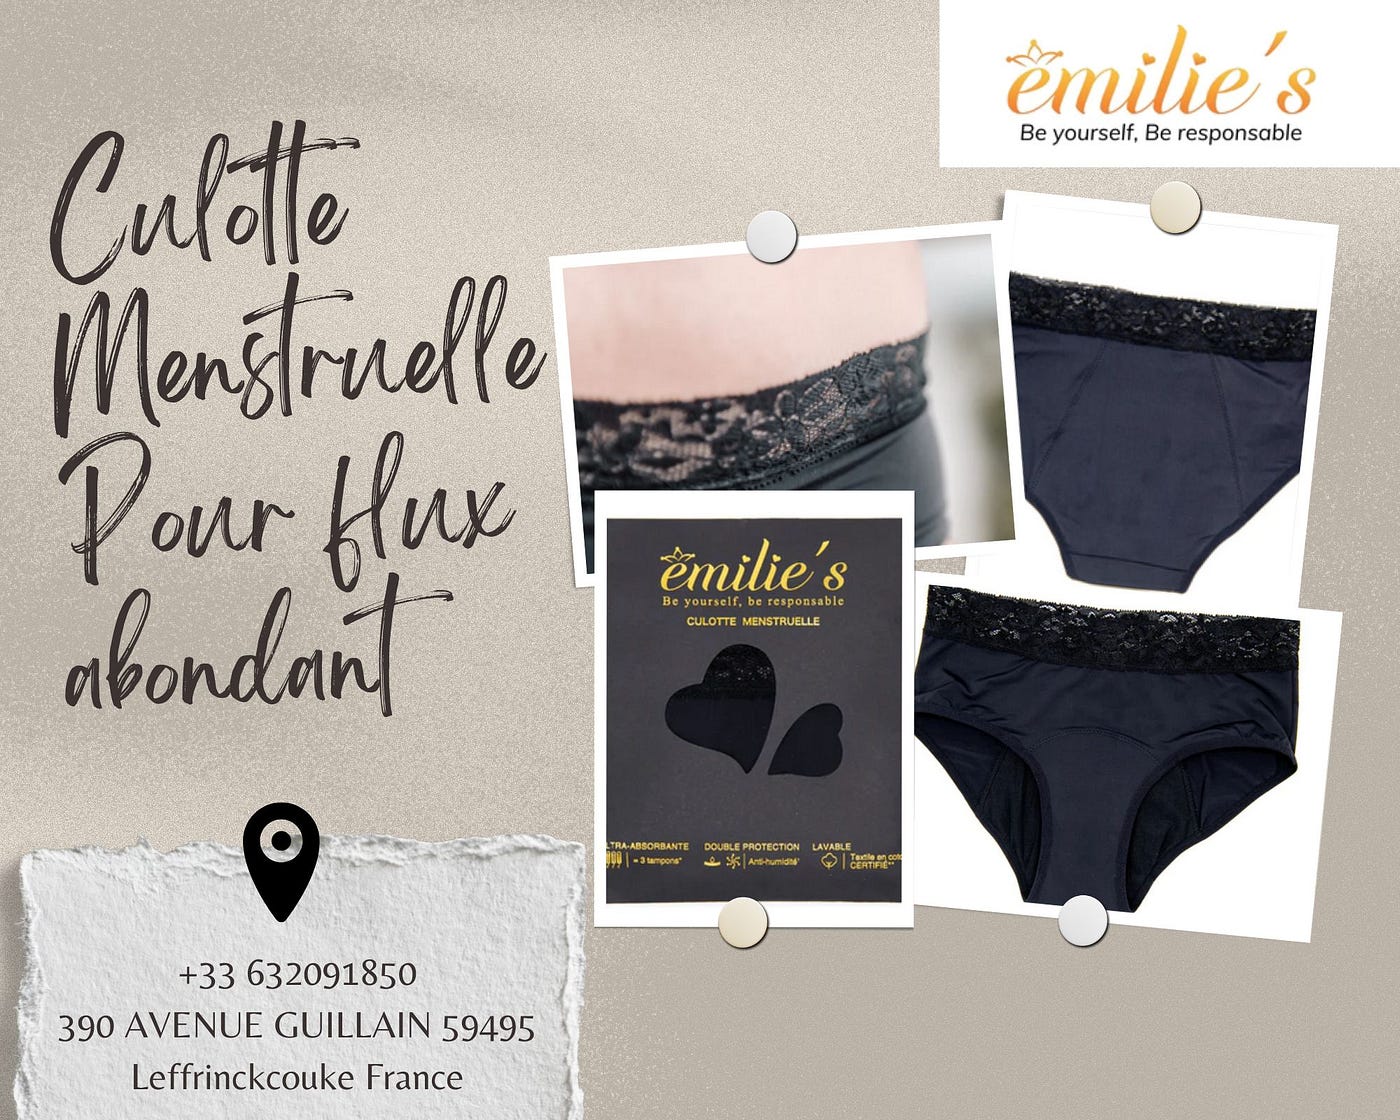 Culotte anti-fuites. Compelling Reasons to Give Menstrual… | by Emilie's |  Medium